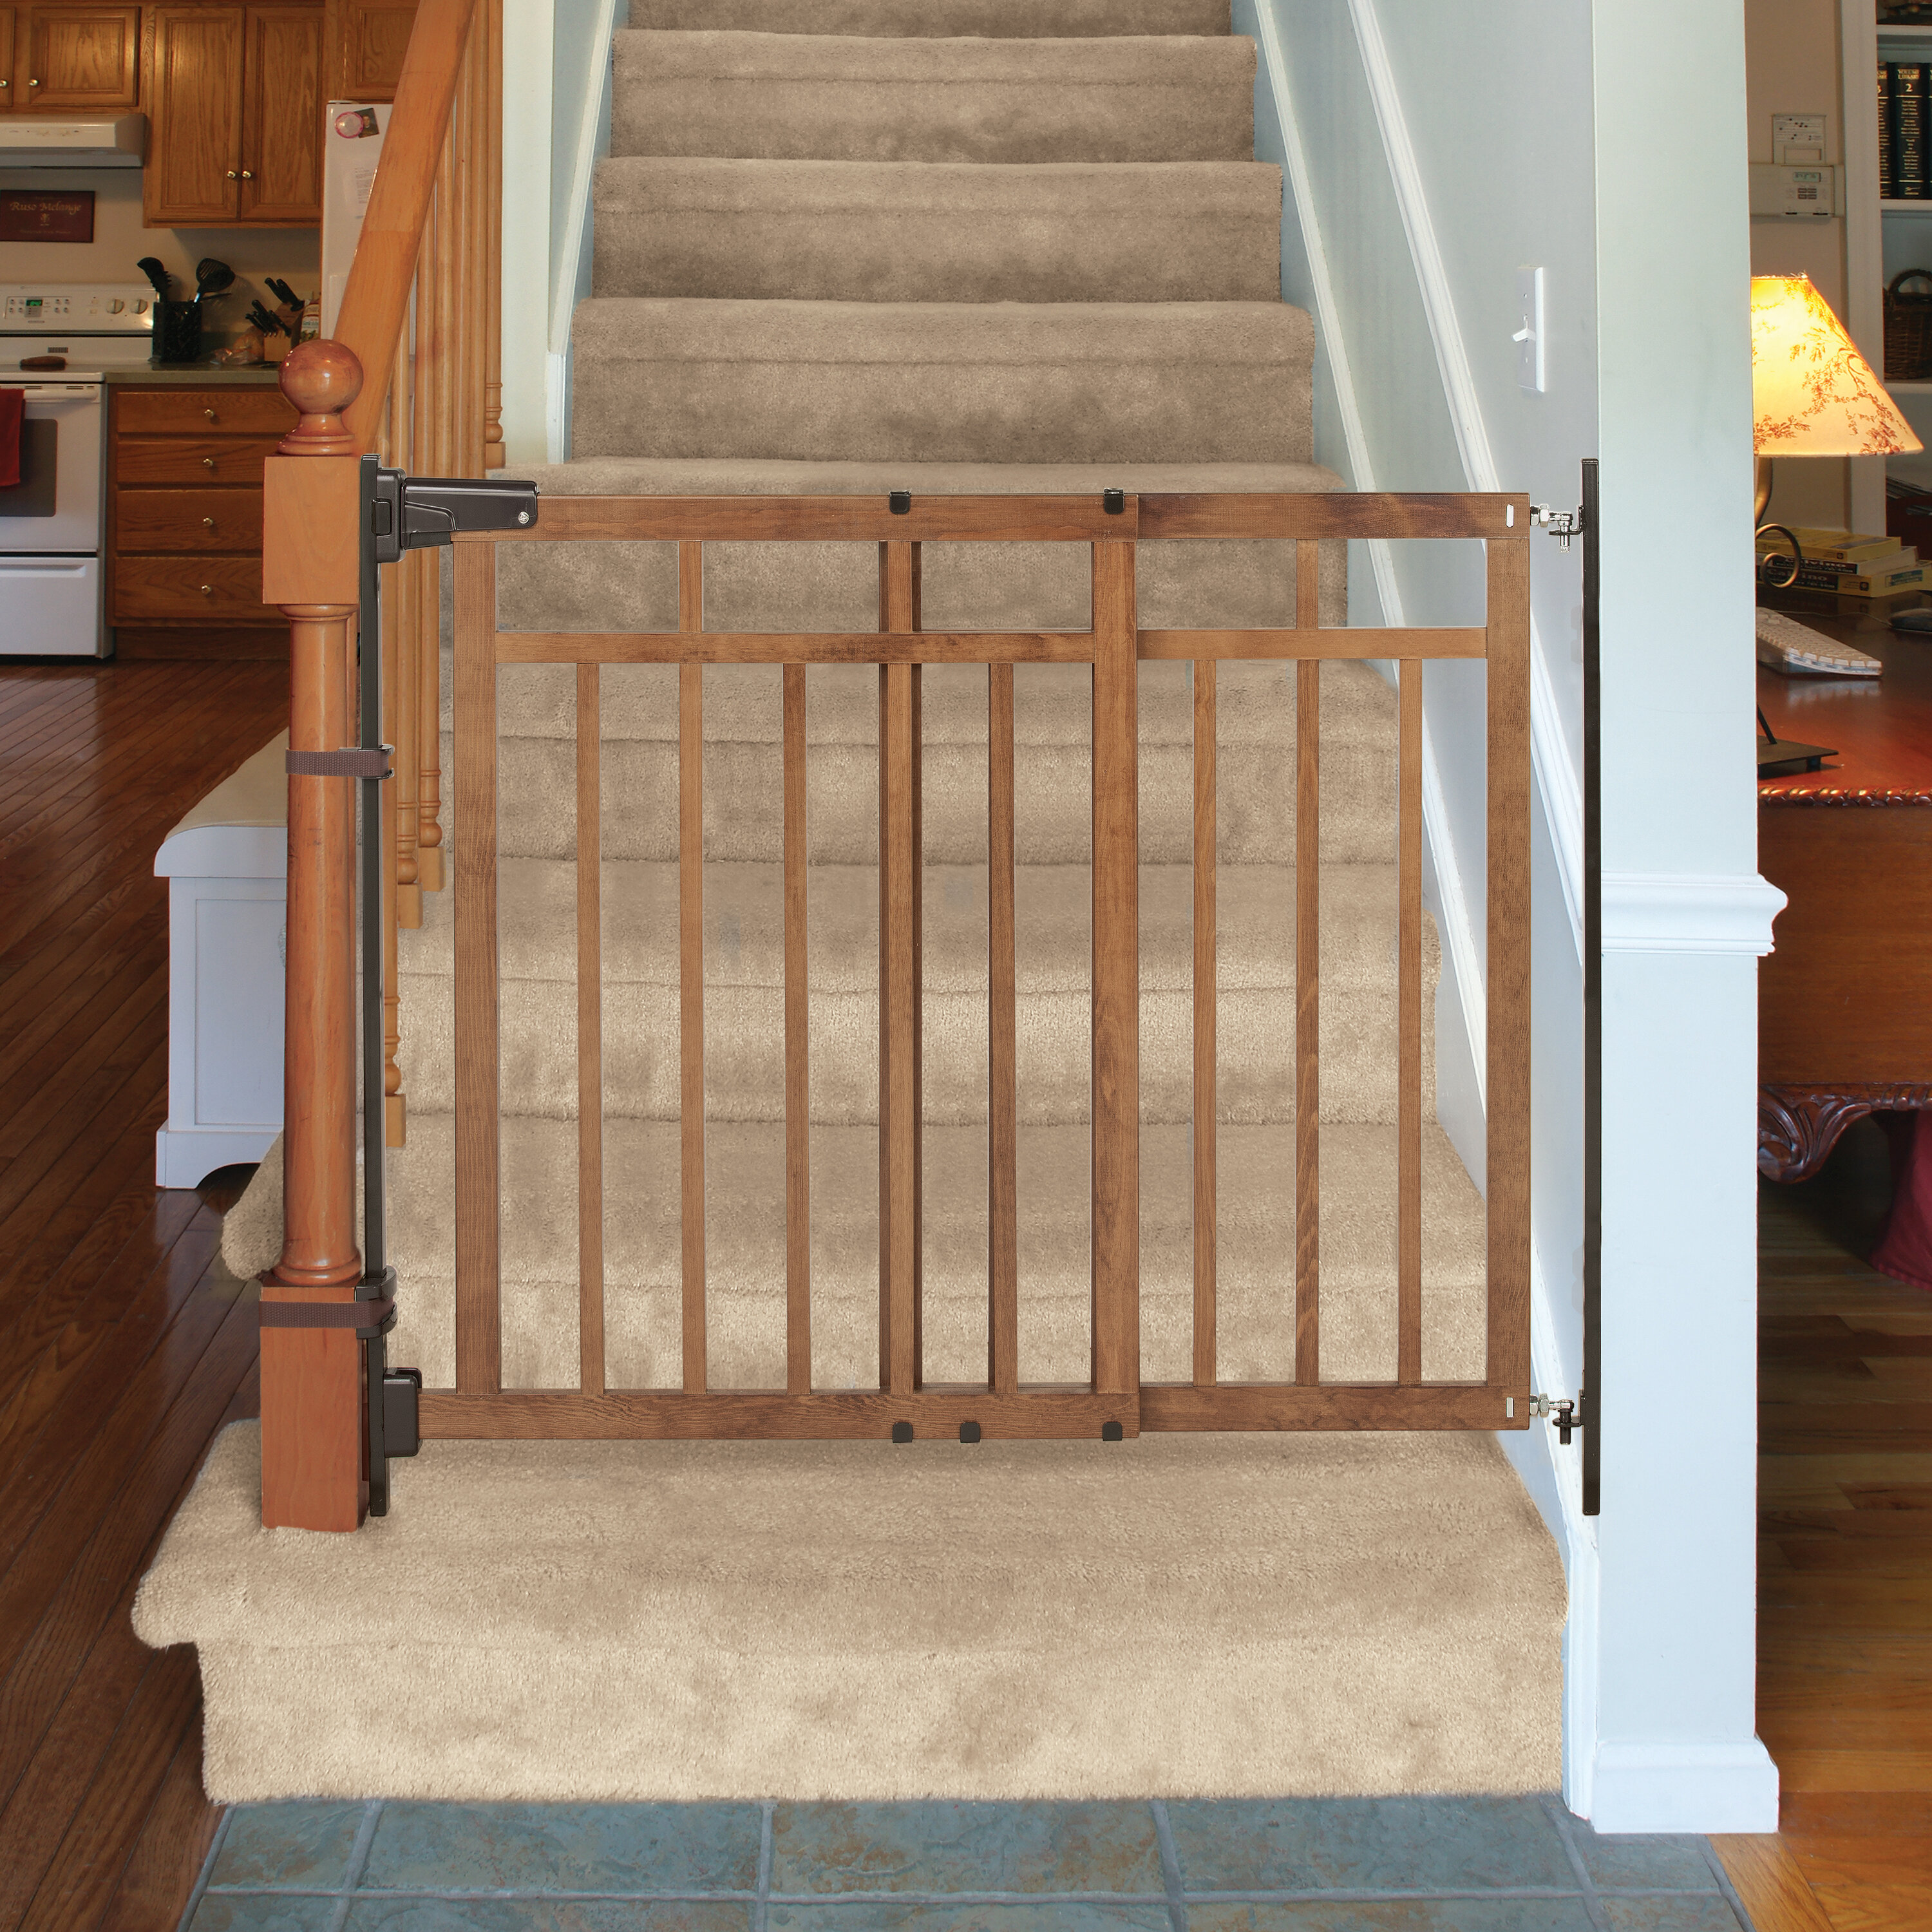 Baby Gate for Stairs 